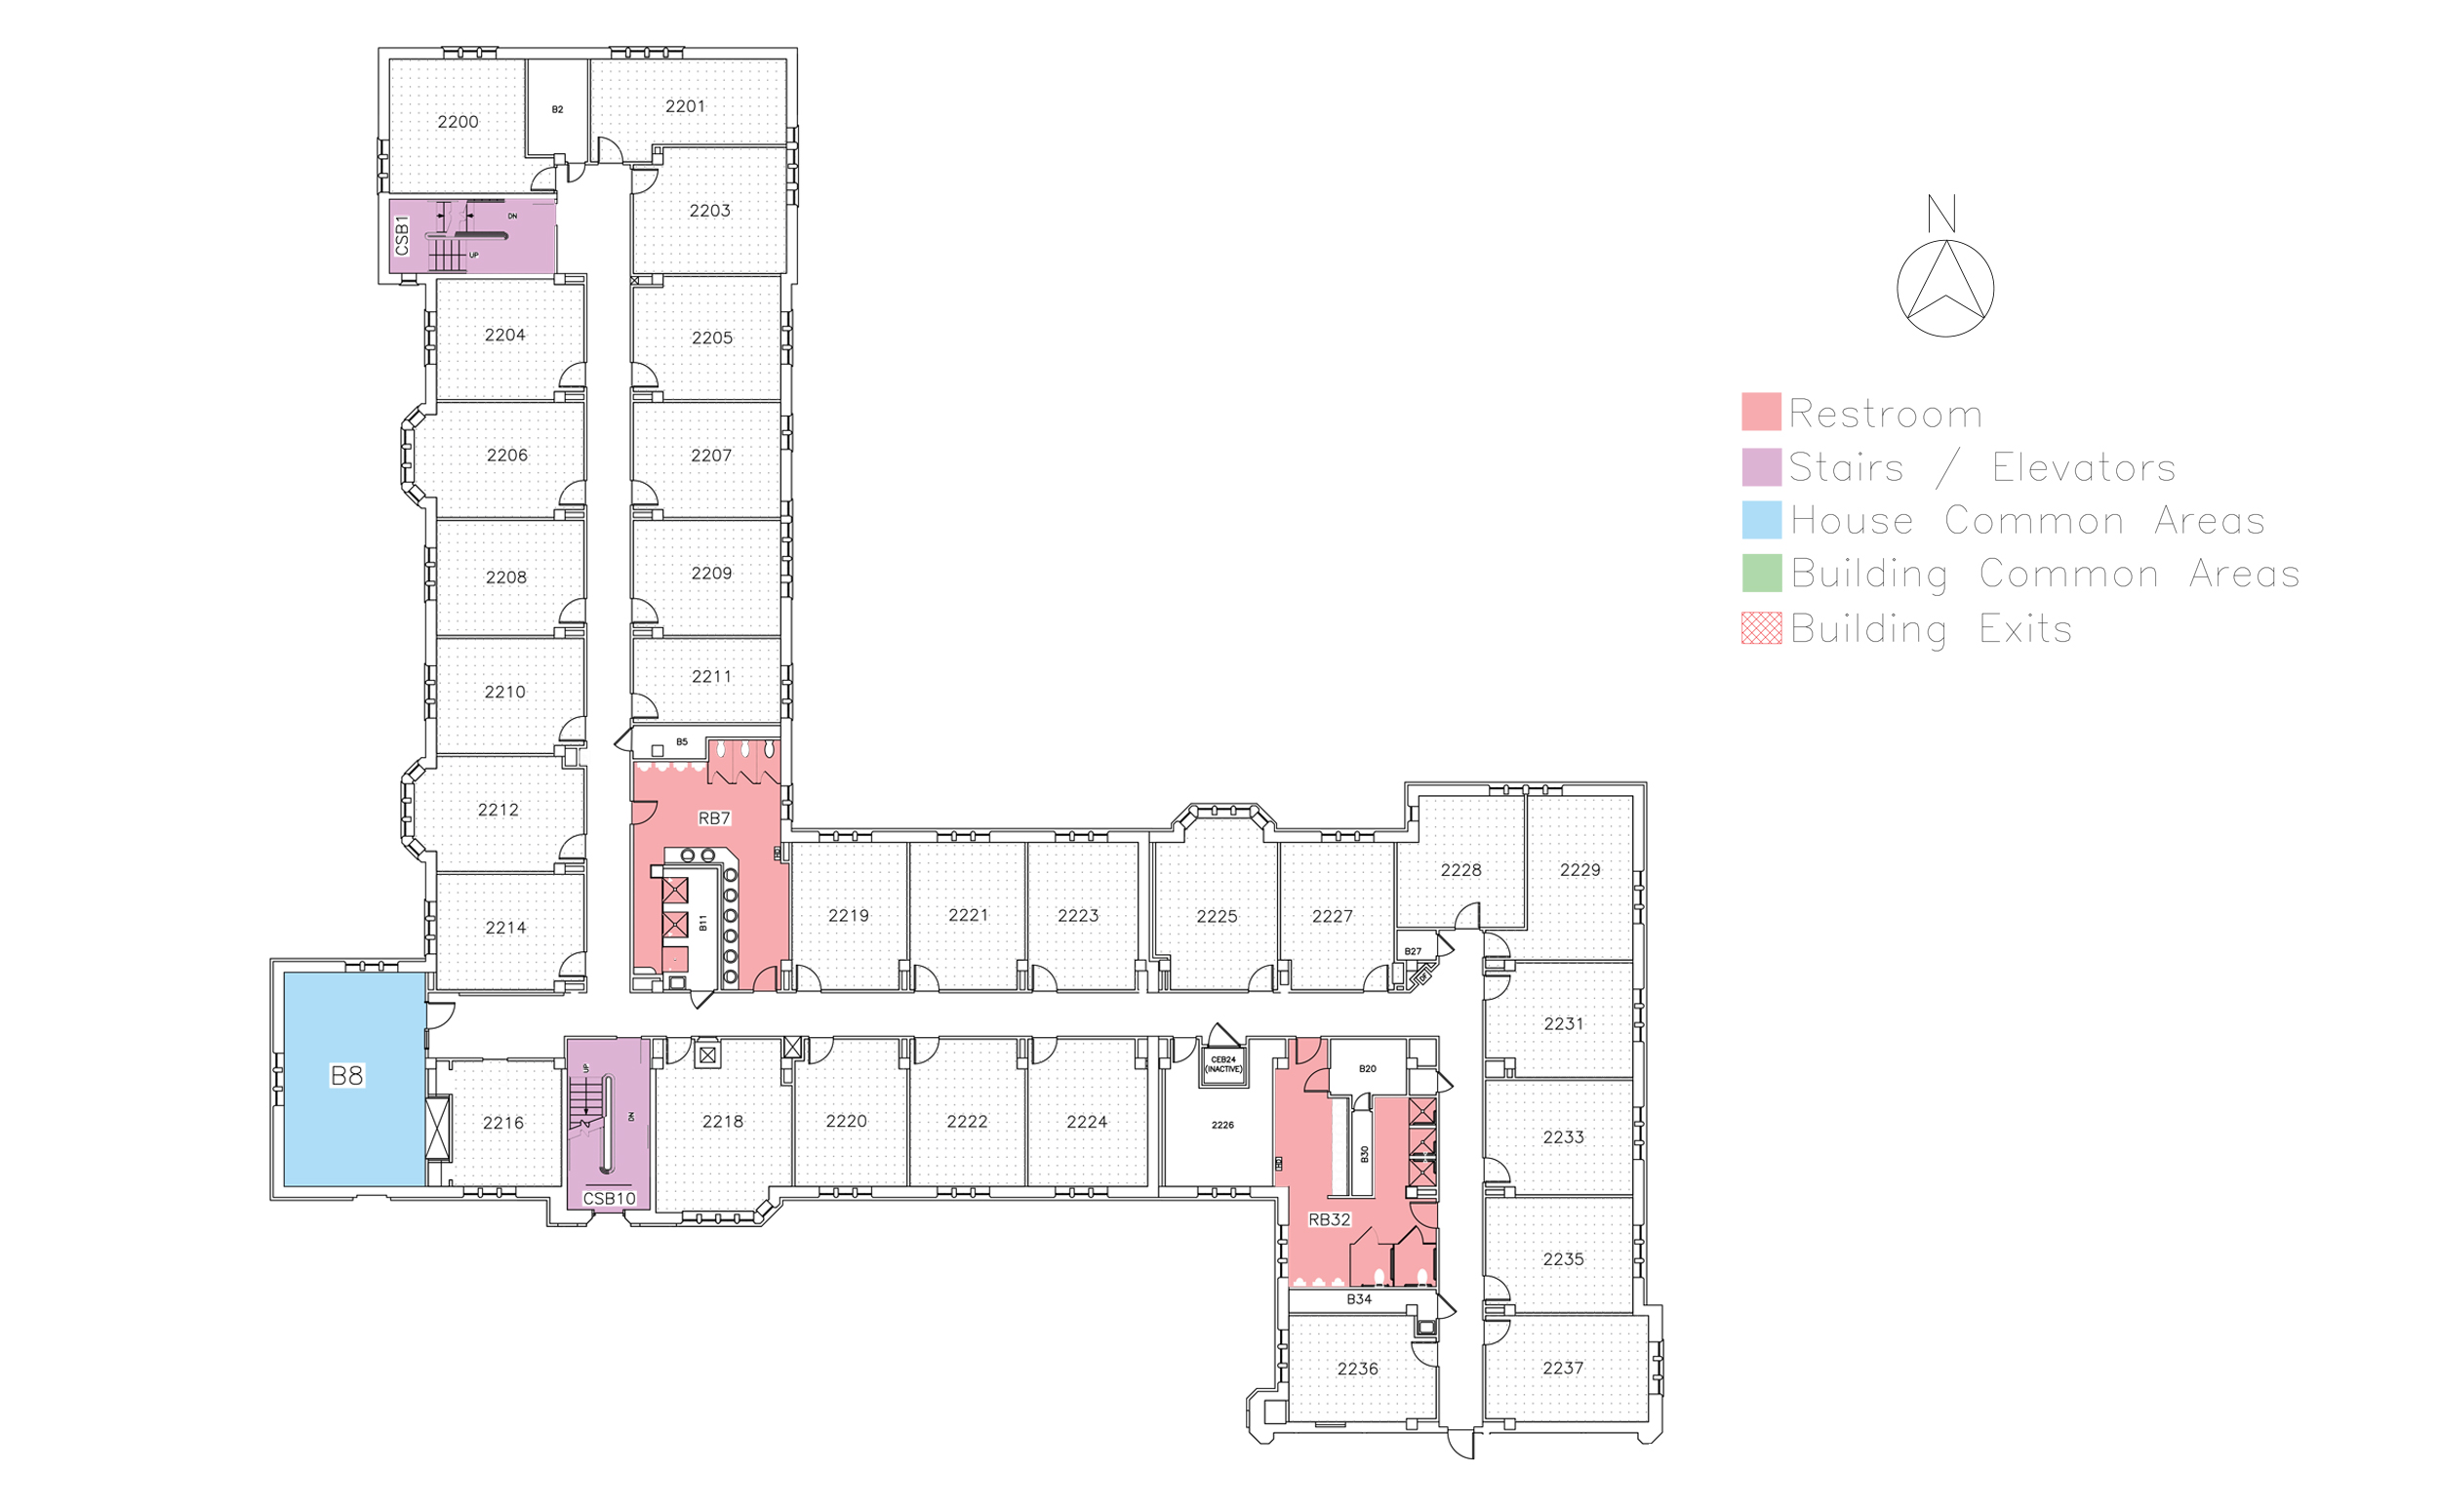 Pearson House, second floor in Friley Hall floor plan. Identifies the location of rooms, bathrooms and common space.